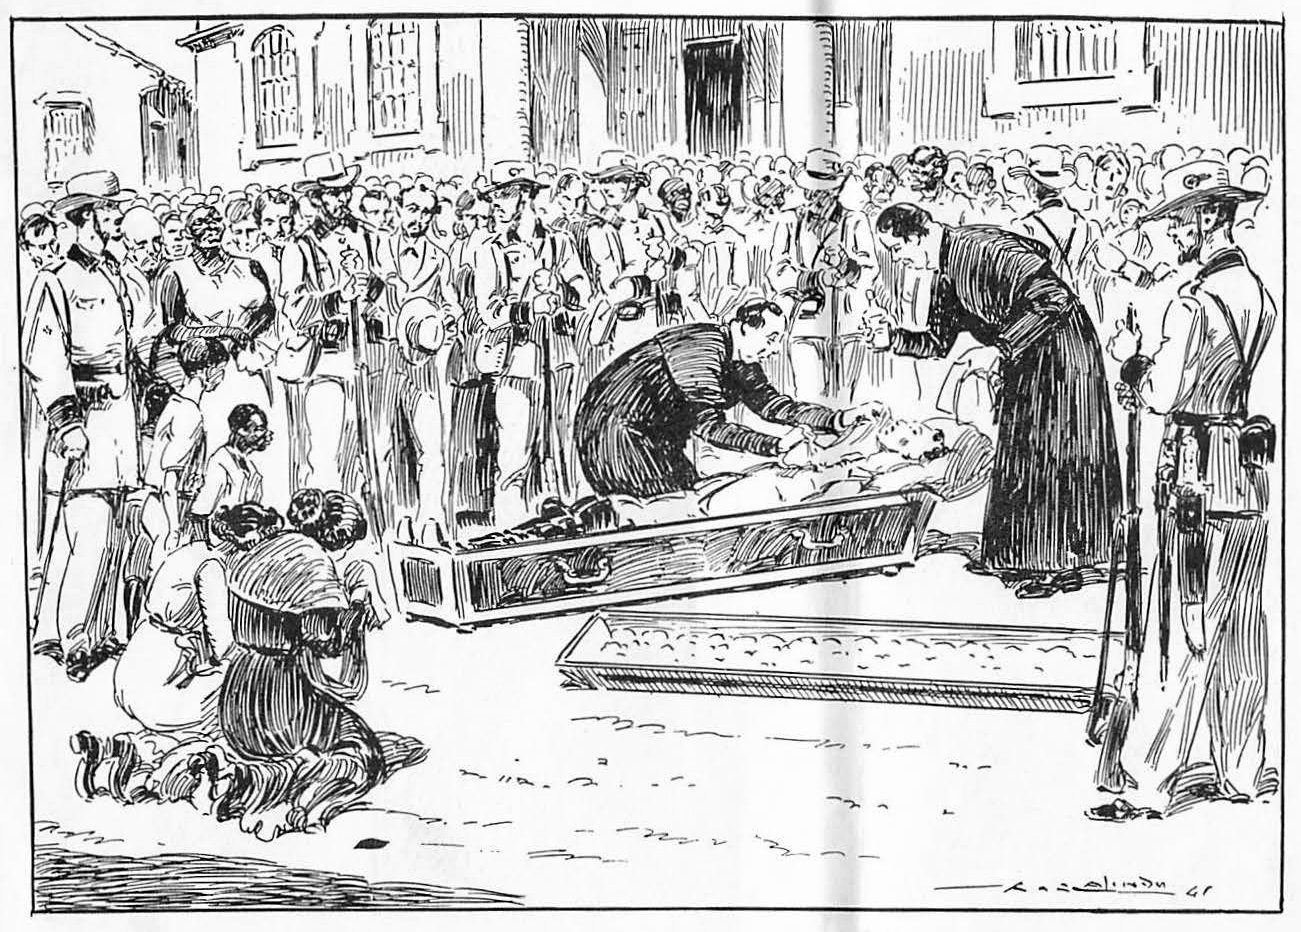 Ignacio Agramonte’s body is laid out and lovingly cleaned by the Brothers Hospitallers of Saint John of God at their hospital in Camagüey. He would inflict more hurt on Spain dead than he had caused while he lived.